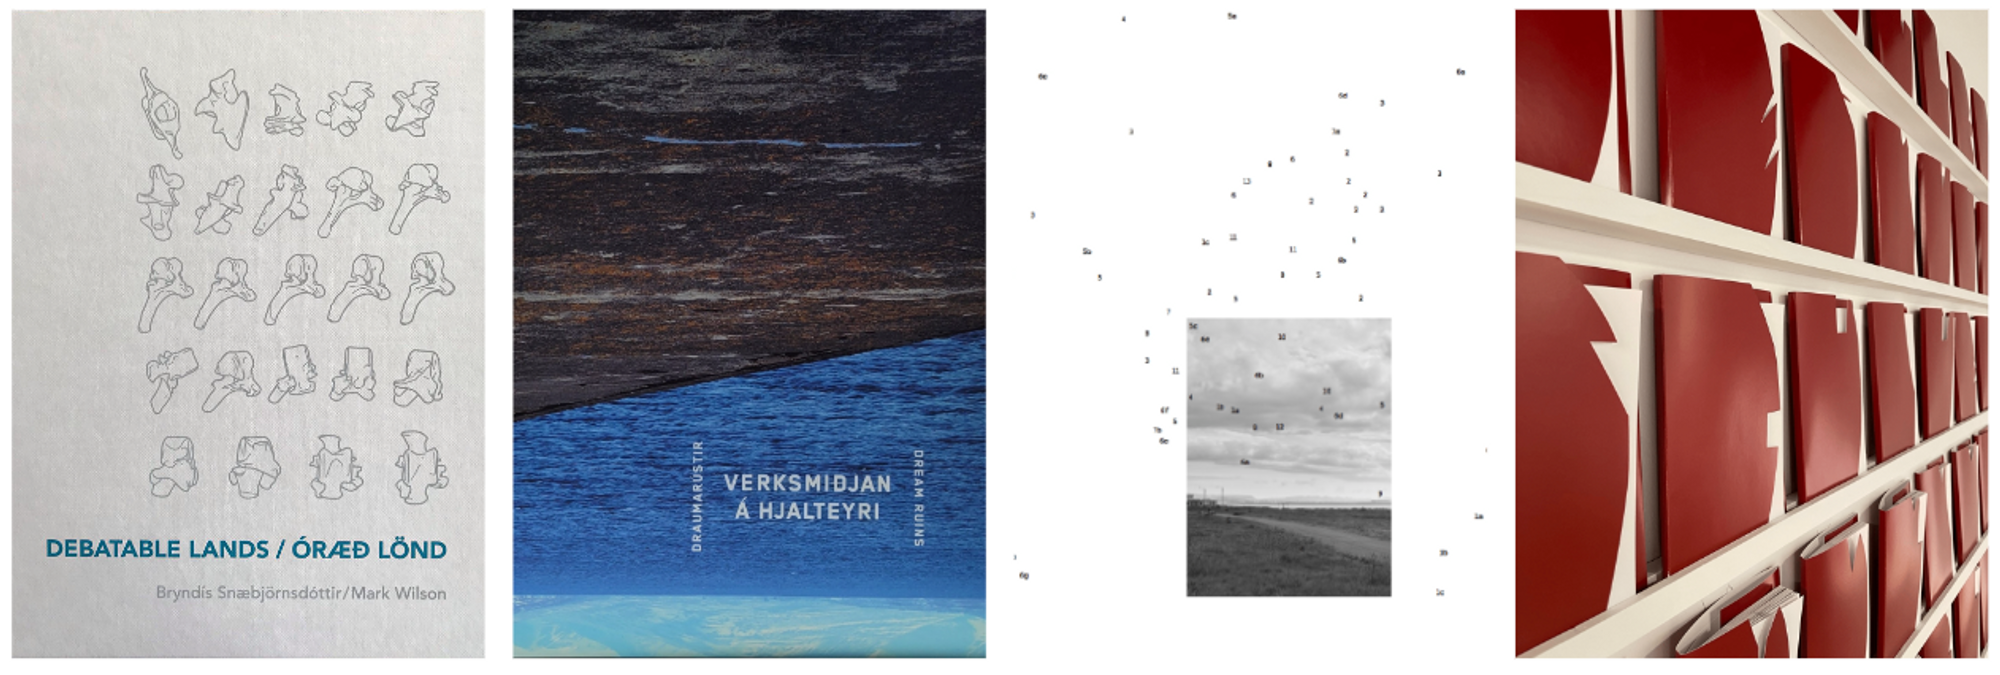 Icelandic Publications related to visual art